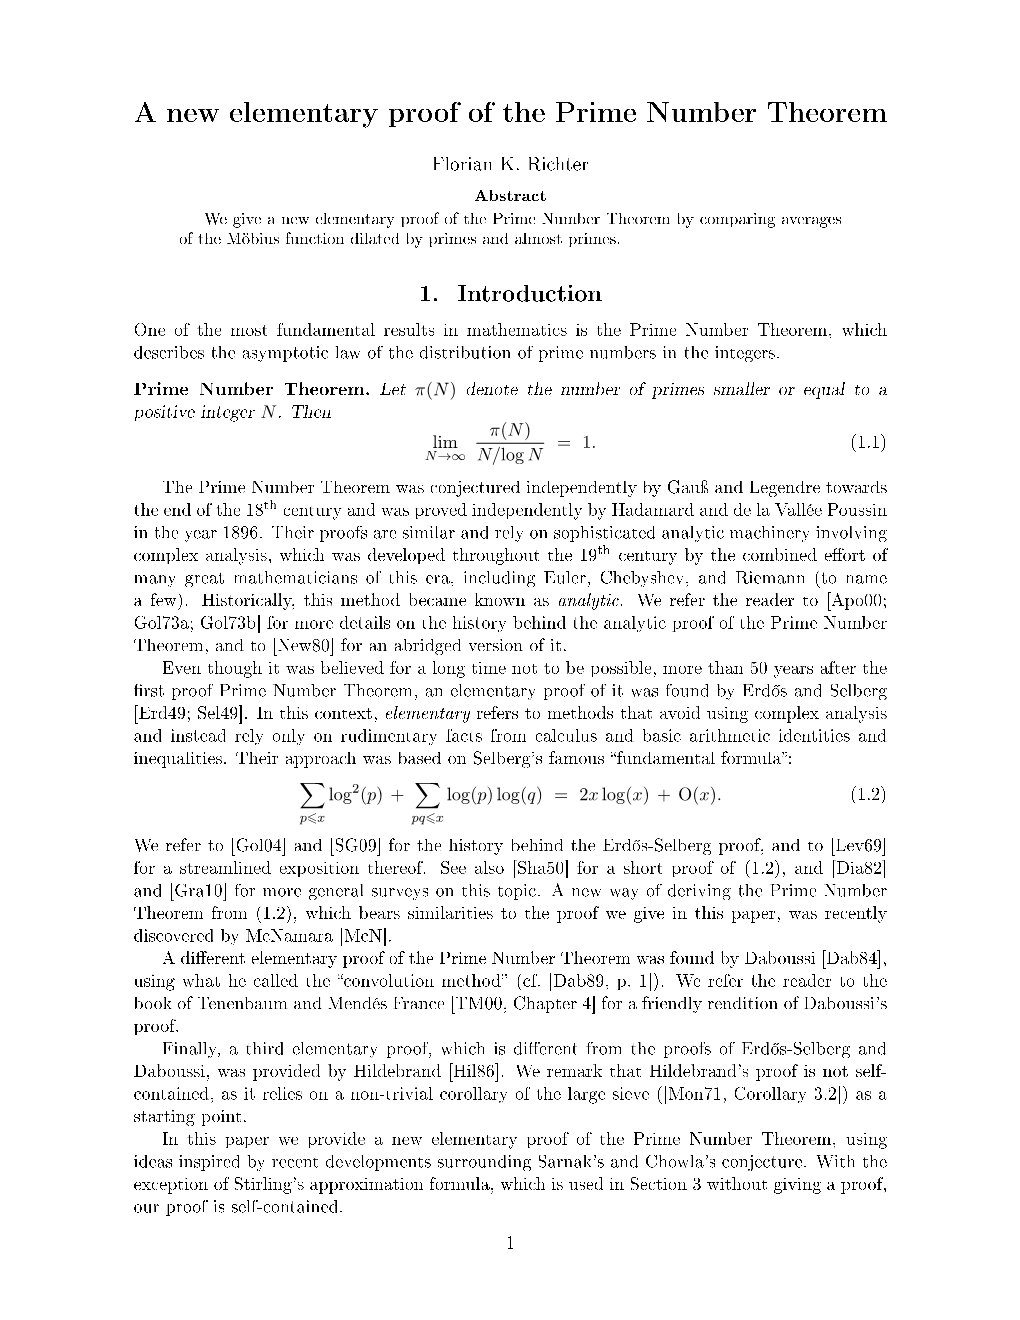 A New Elementary Proof of the Prime Number Theorem